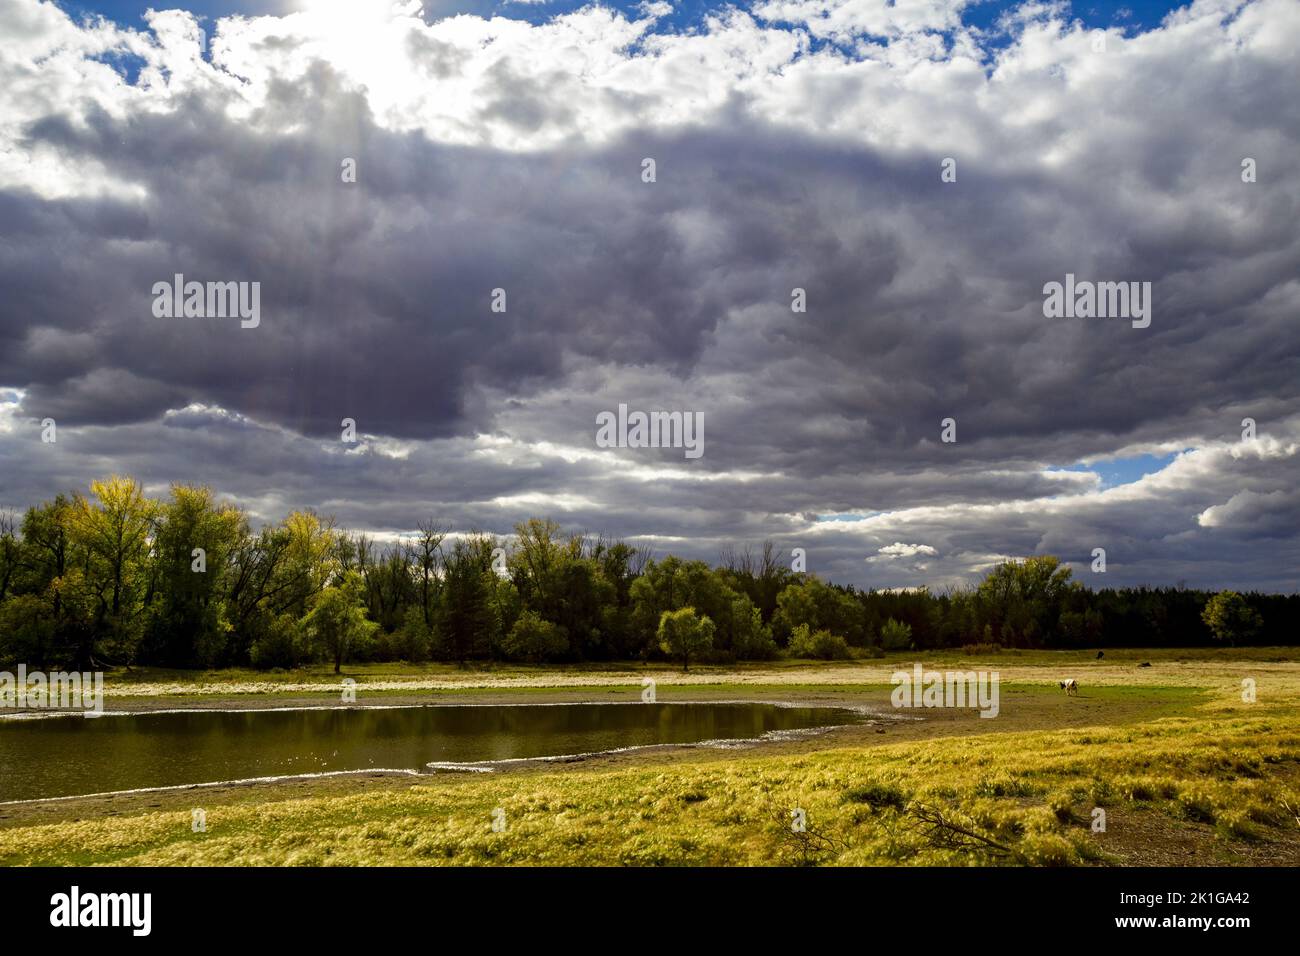 Autumn landscape with dark rainy sky over the shore of a lake with grazing cows. Stock Photo